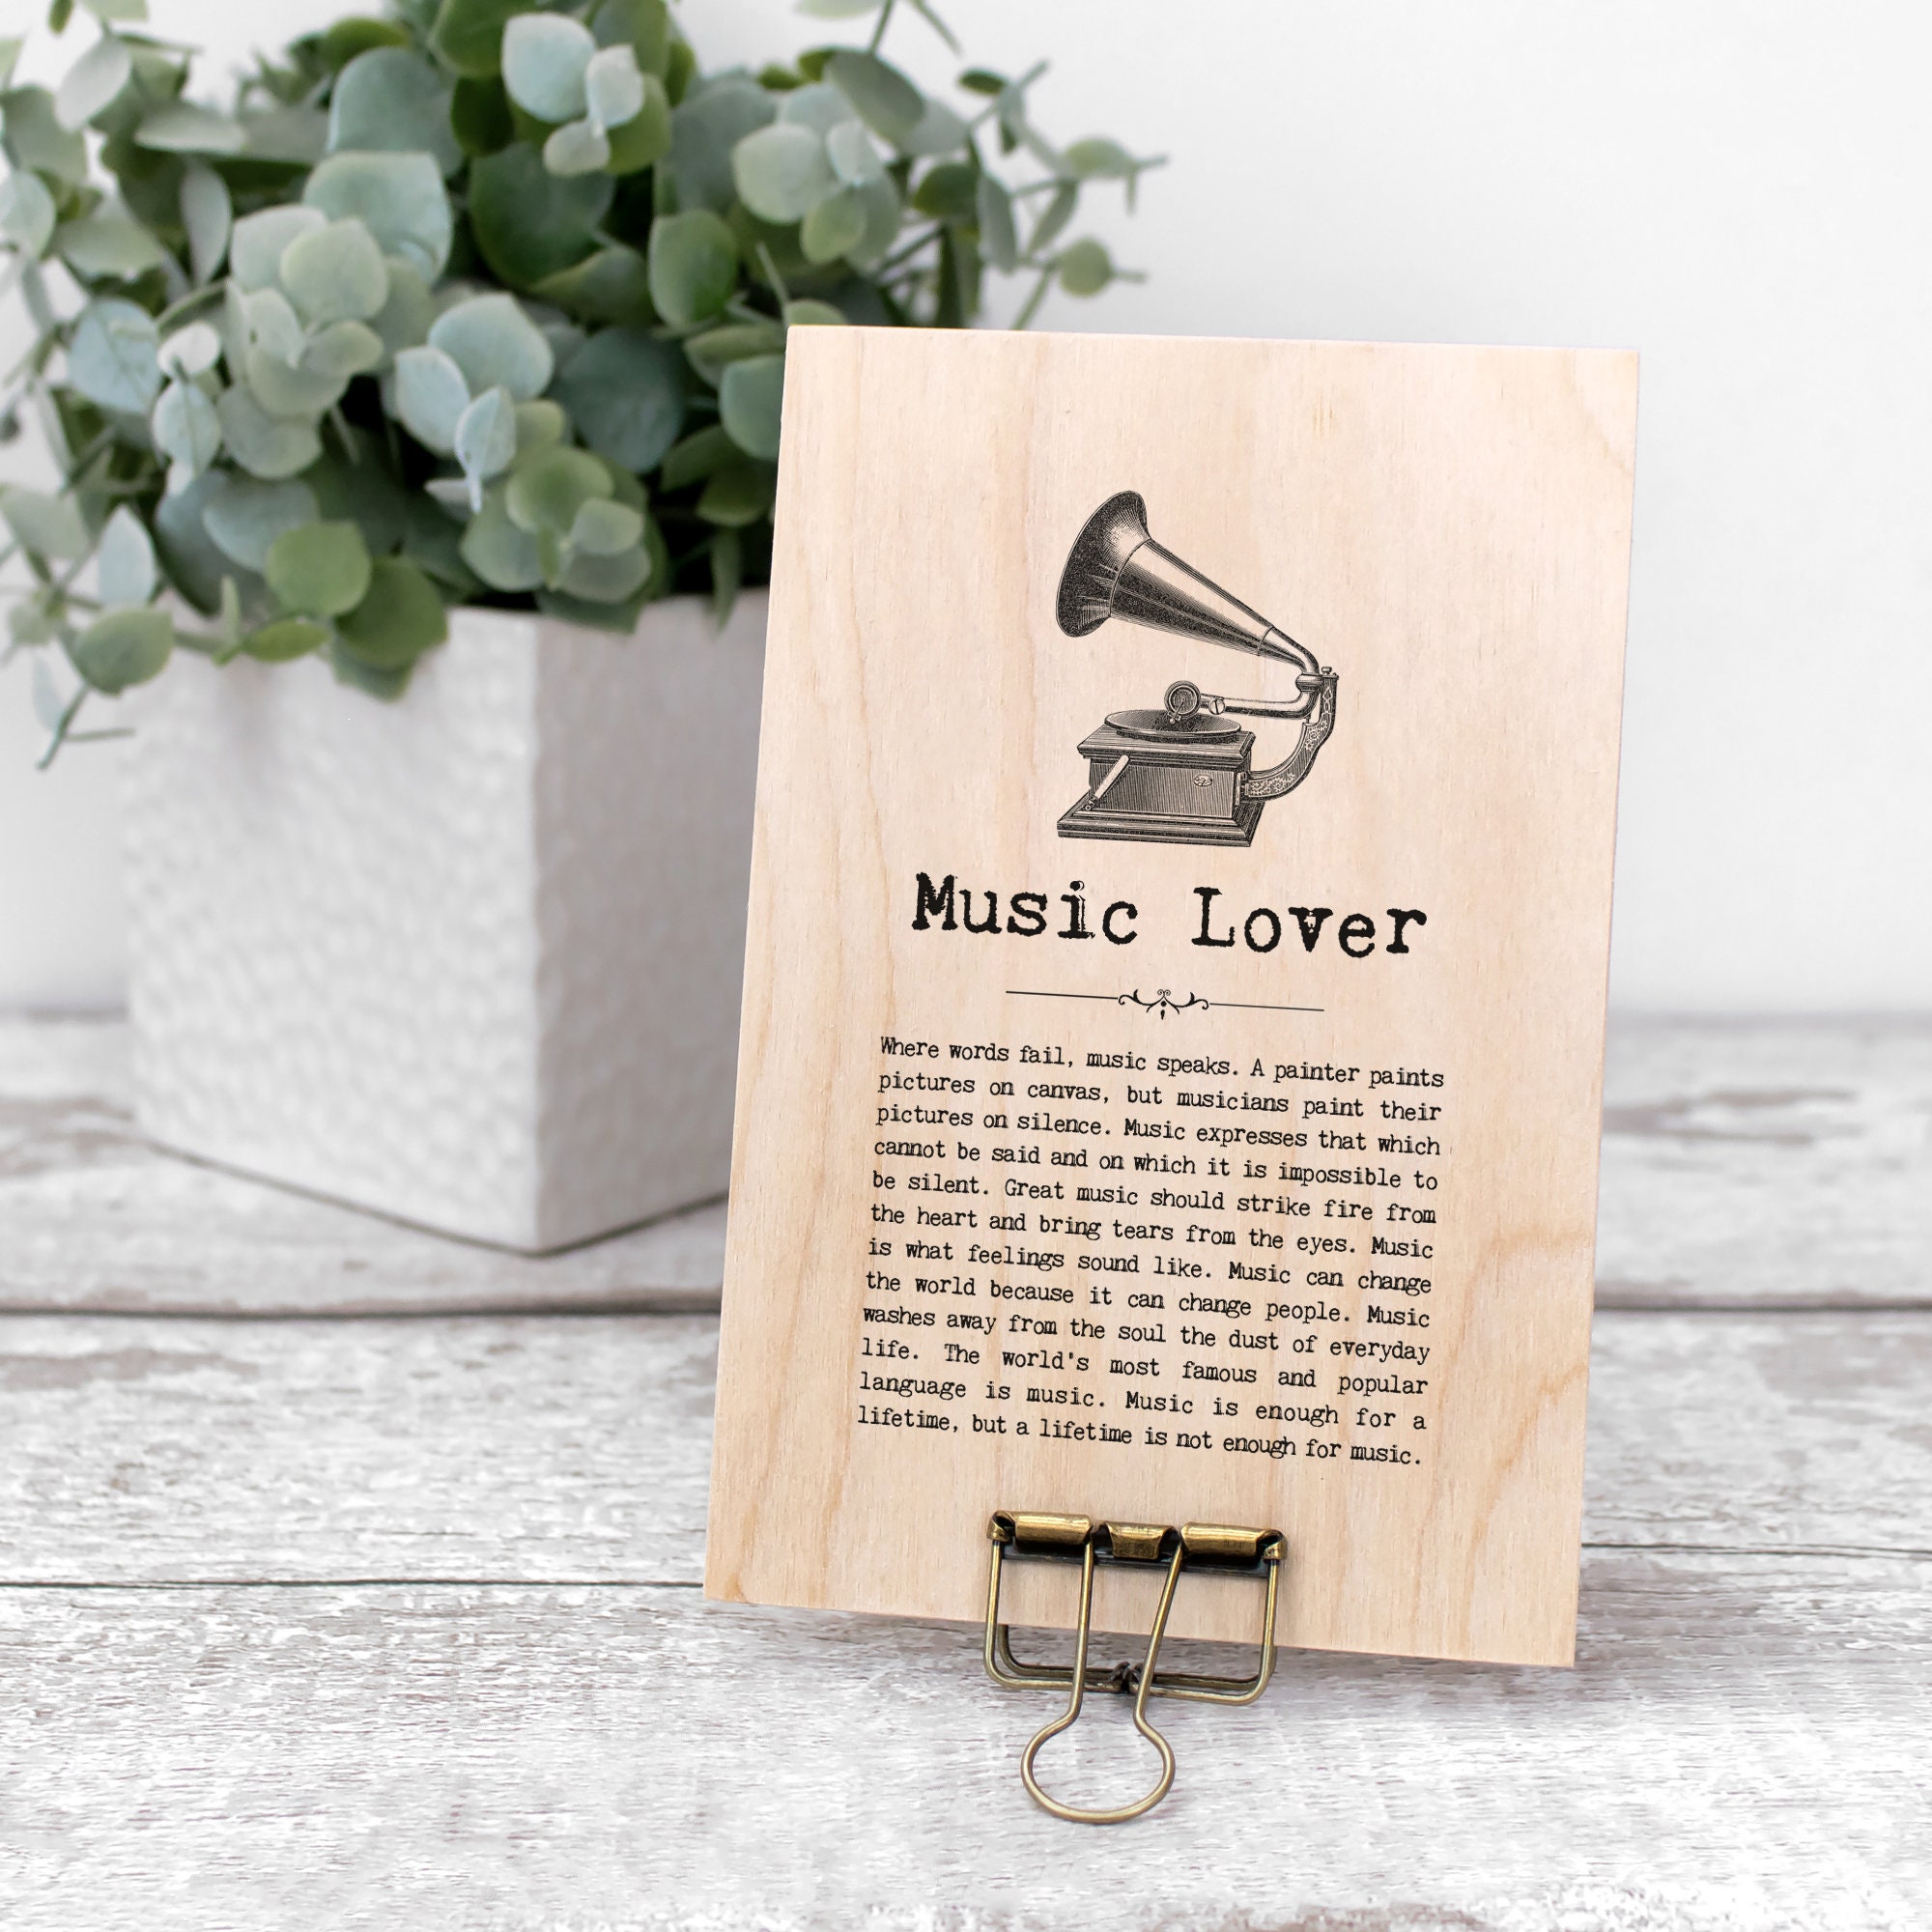 The Music Lover’s Wooden Engraving